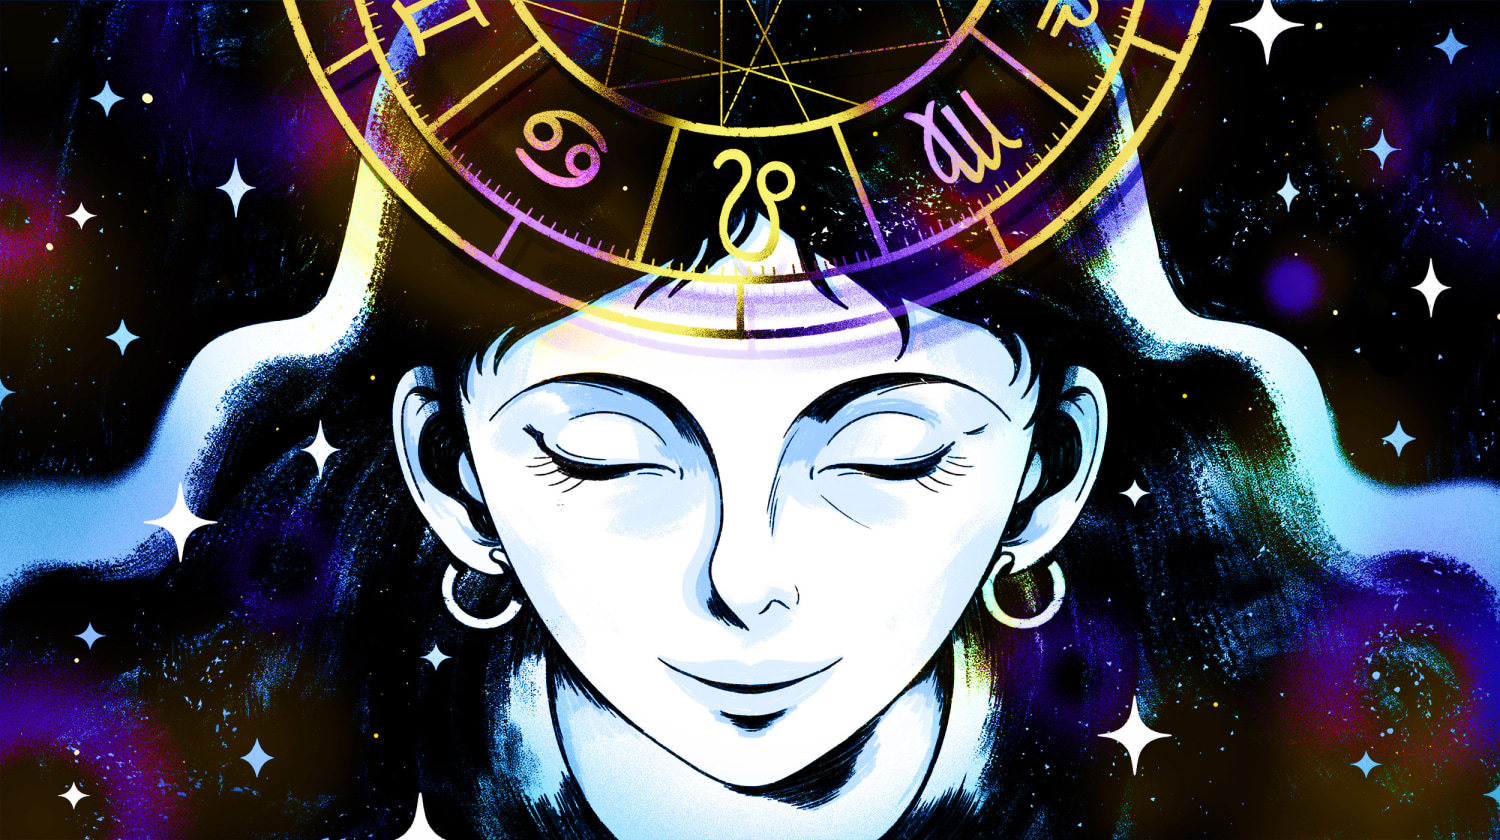 Astrology doesn't need to be scientifically proven to be empowering — or  feminist